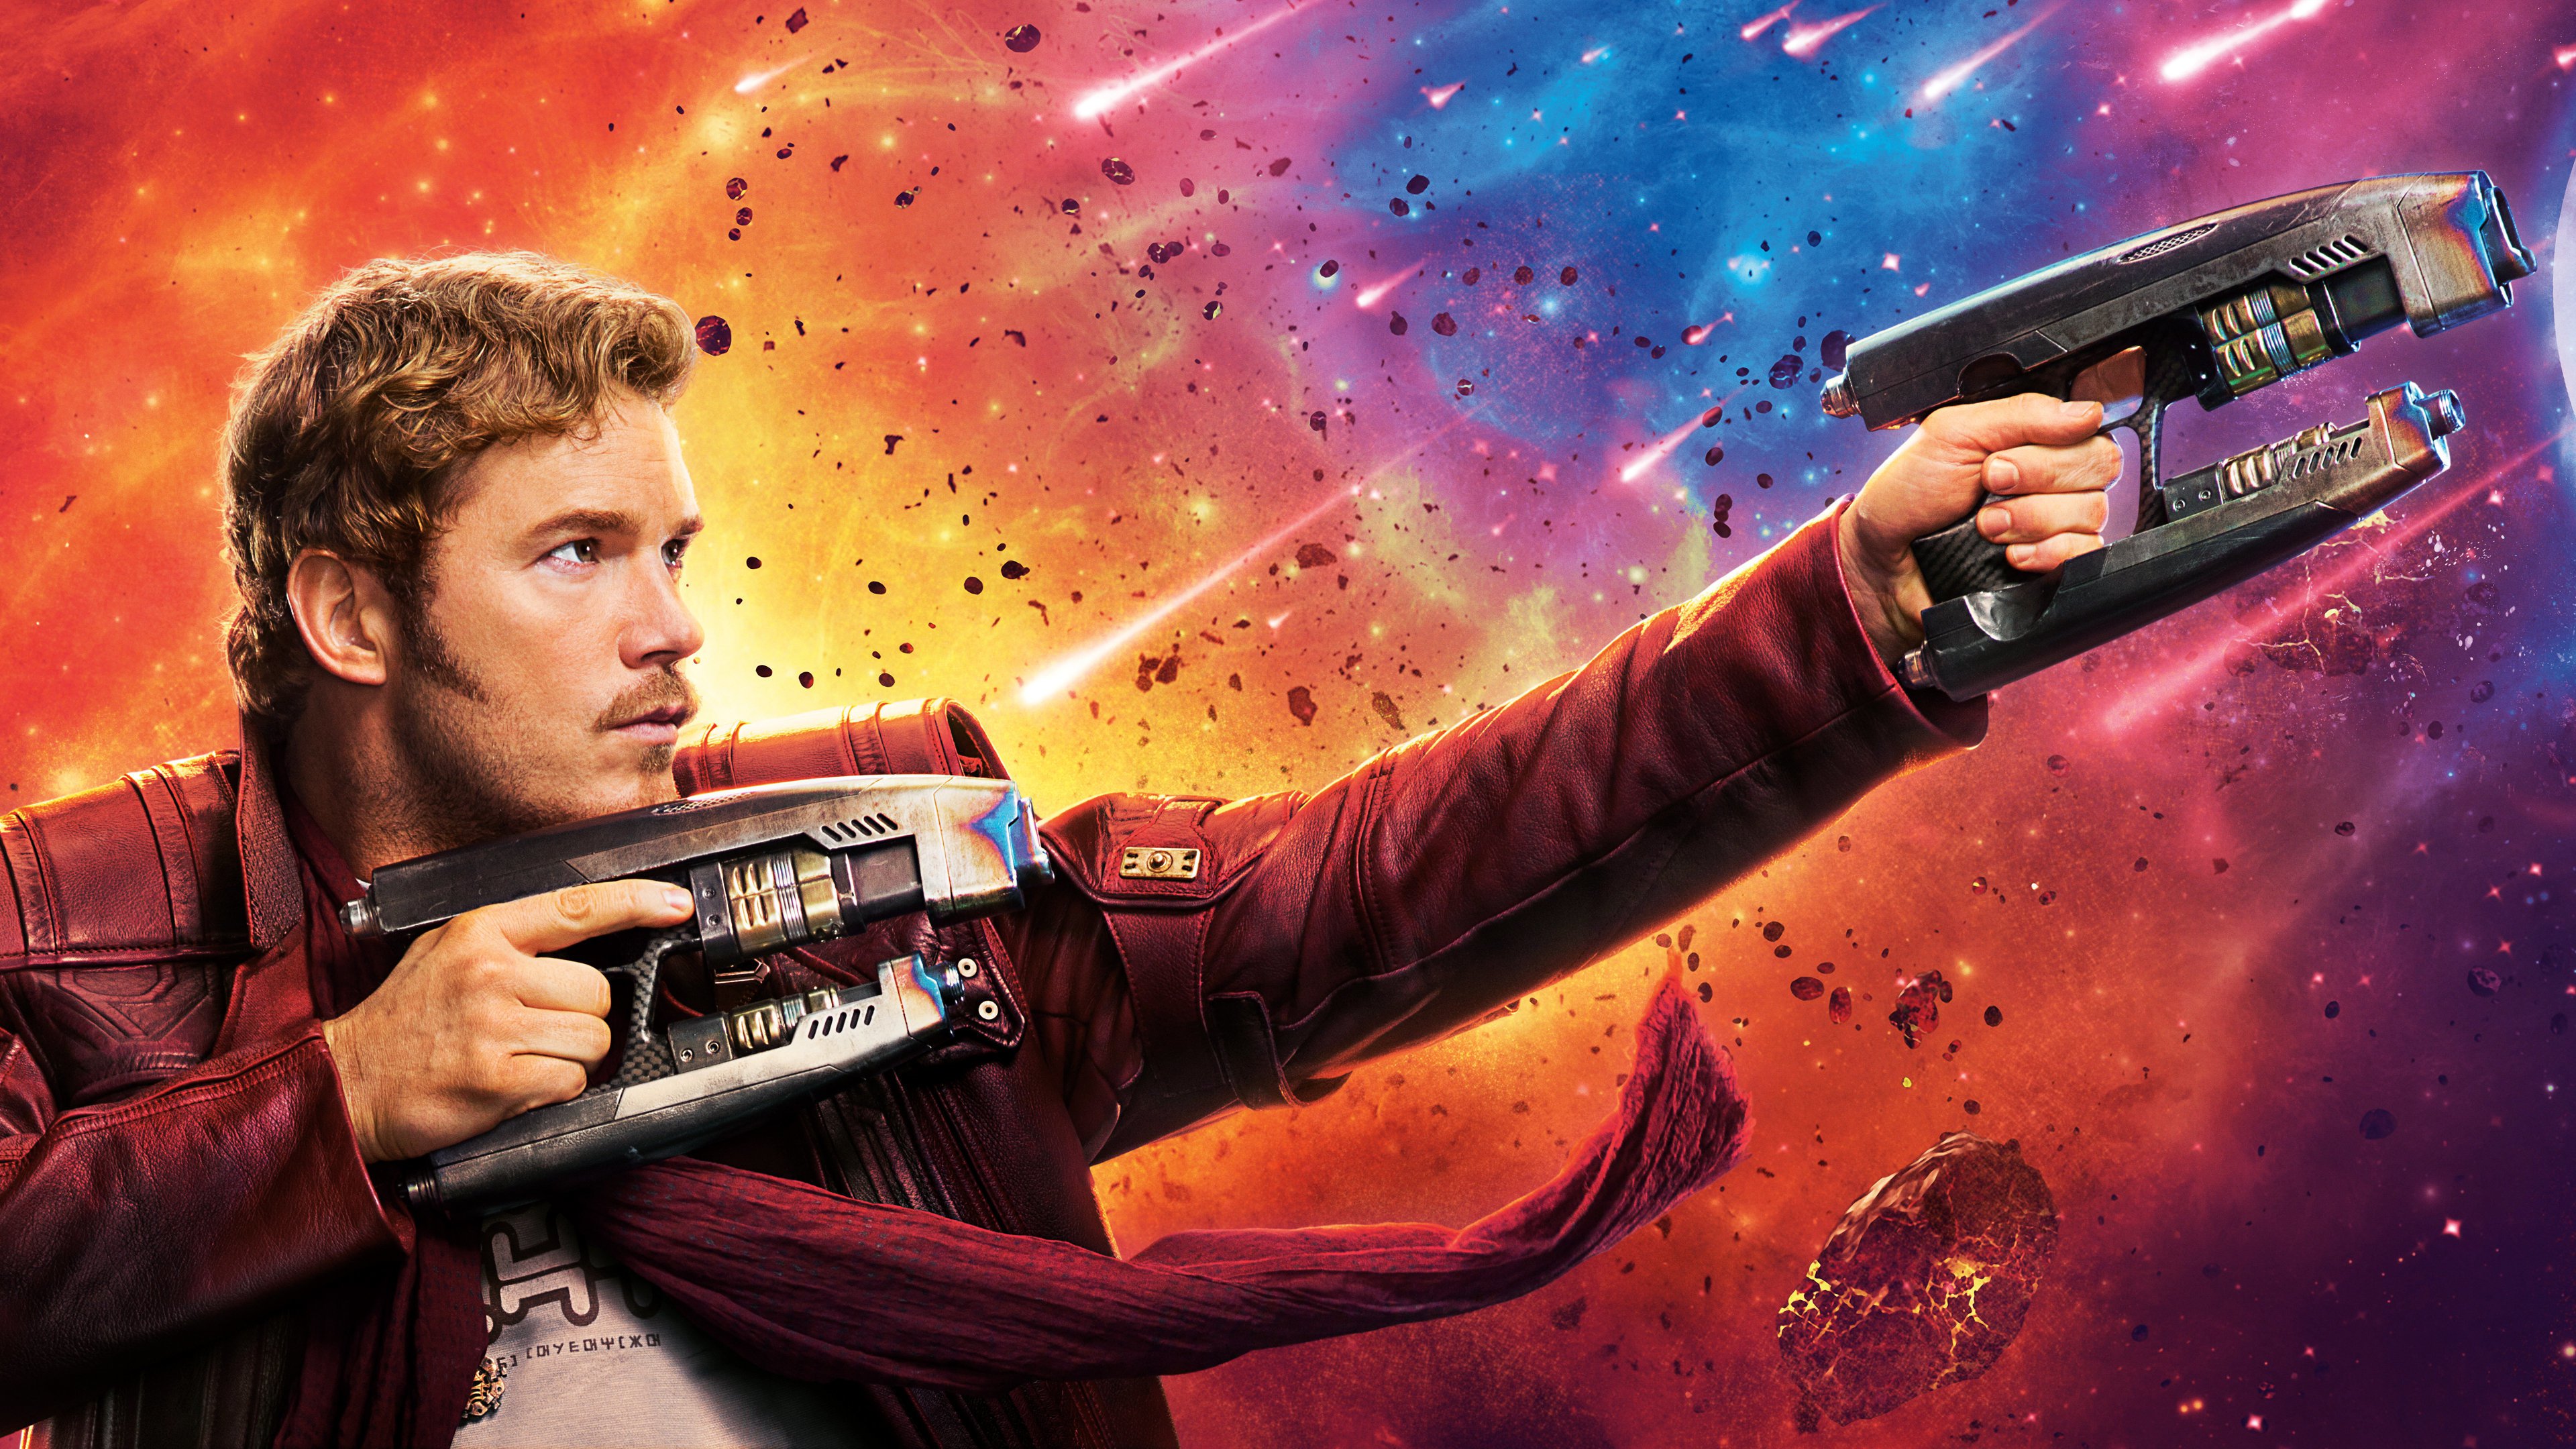 guardians of the galaxy vol 2 soundtrack song list